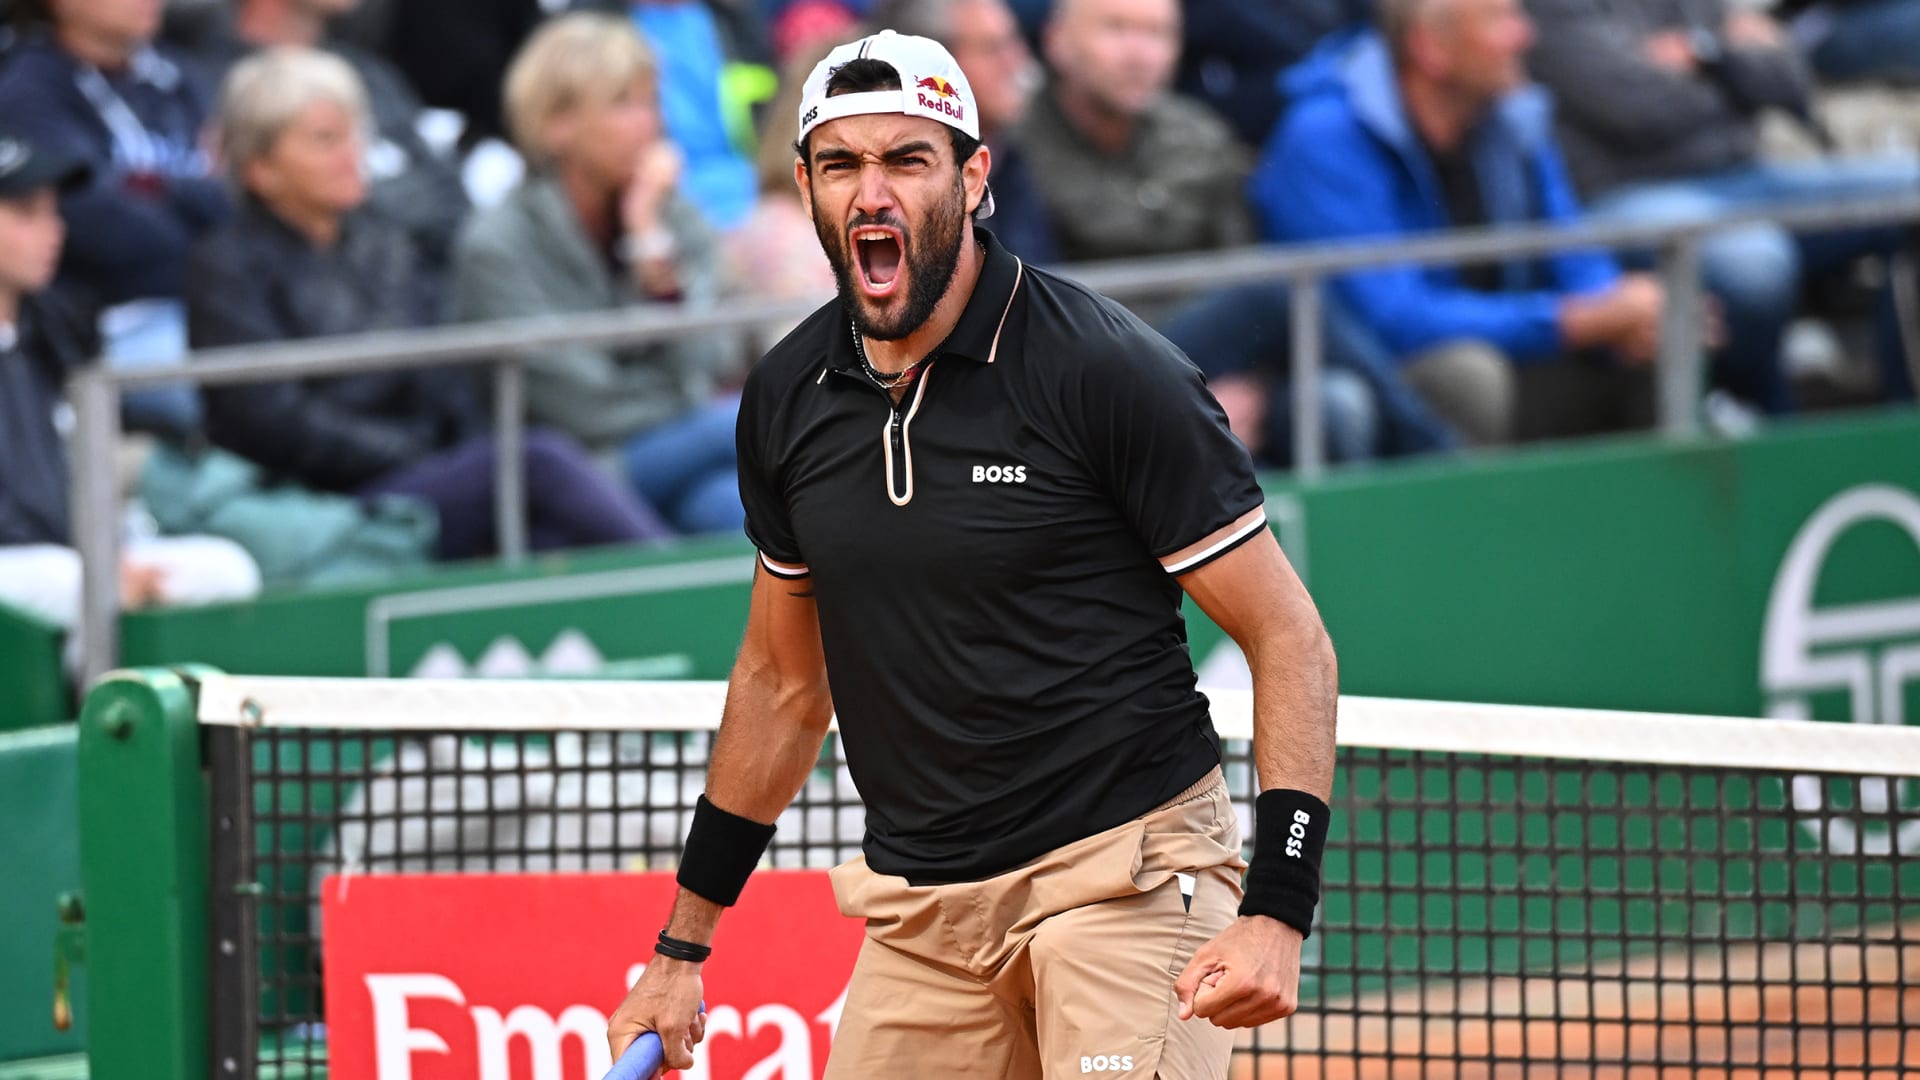 Matteo Berrettinis 27th birthday delivers a Monte Carlo match he wont soon forget